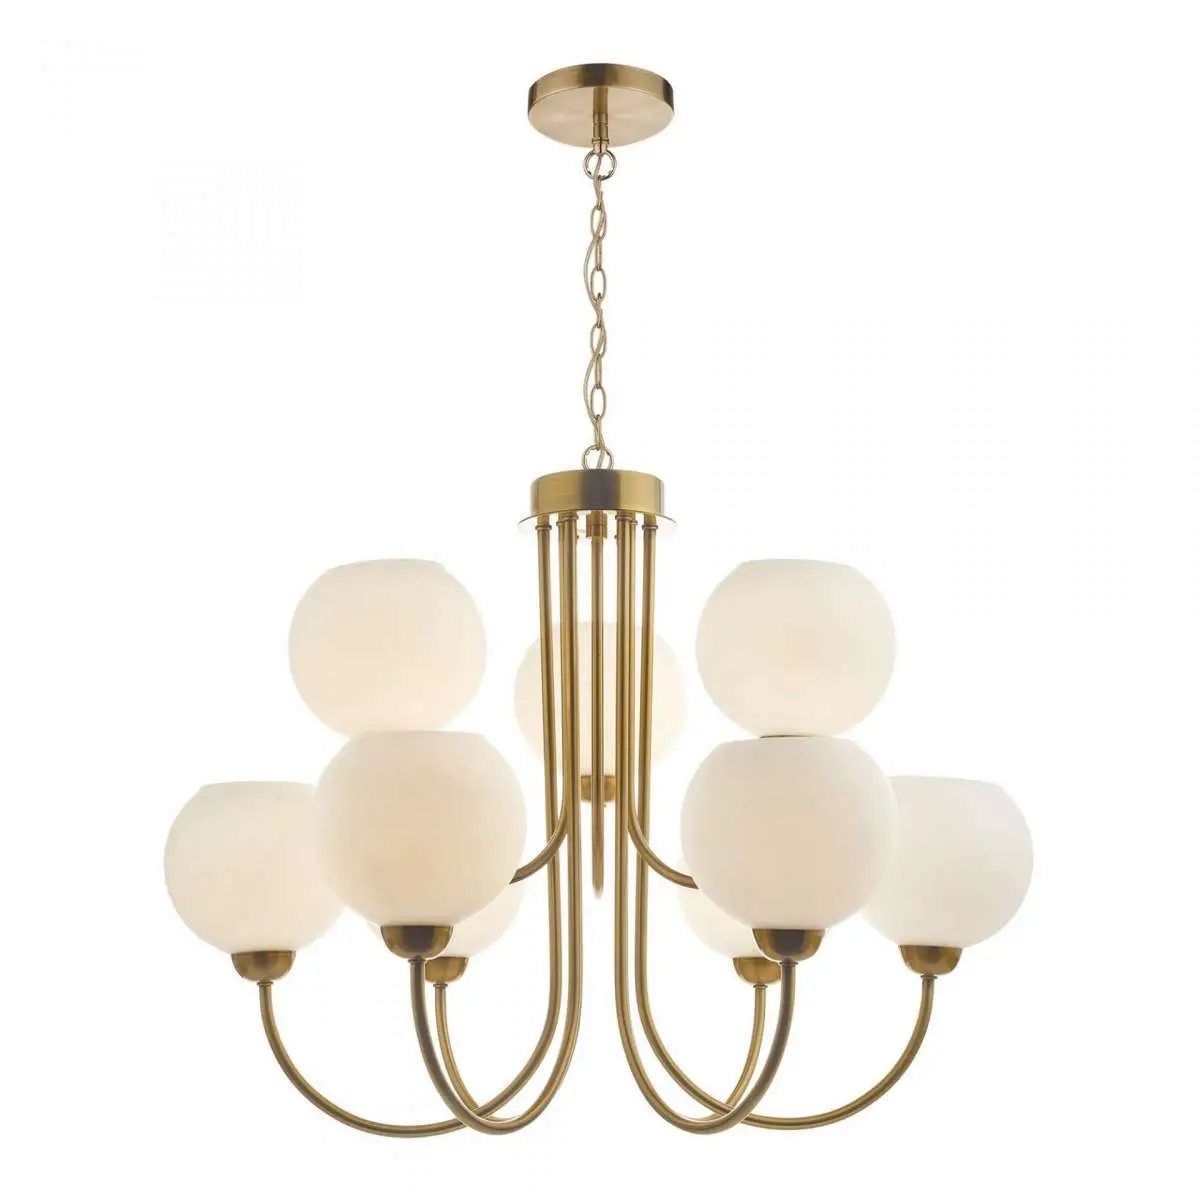 Indra 9 Light Pendant Natural Brass With Opal Glass